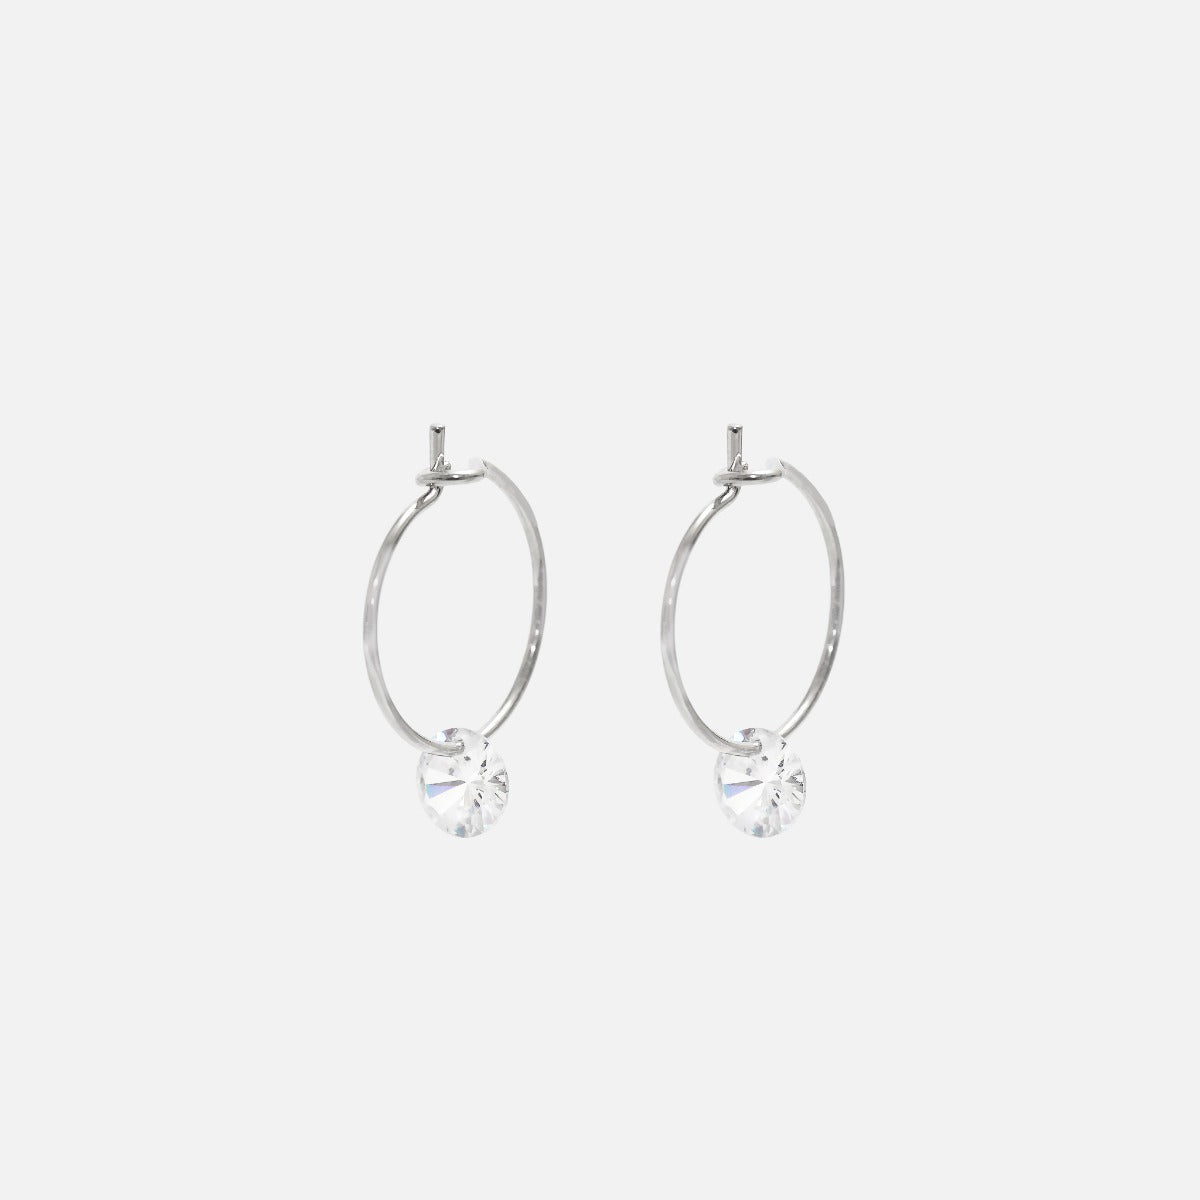 Trio of fixed silver earrings and hoops